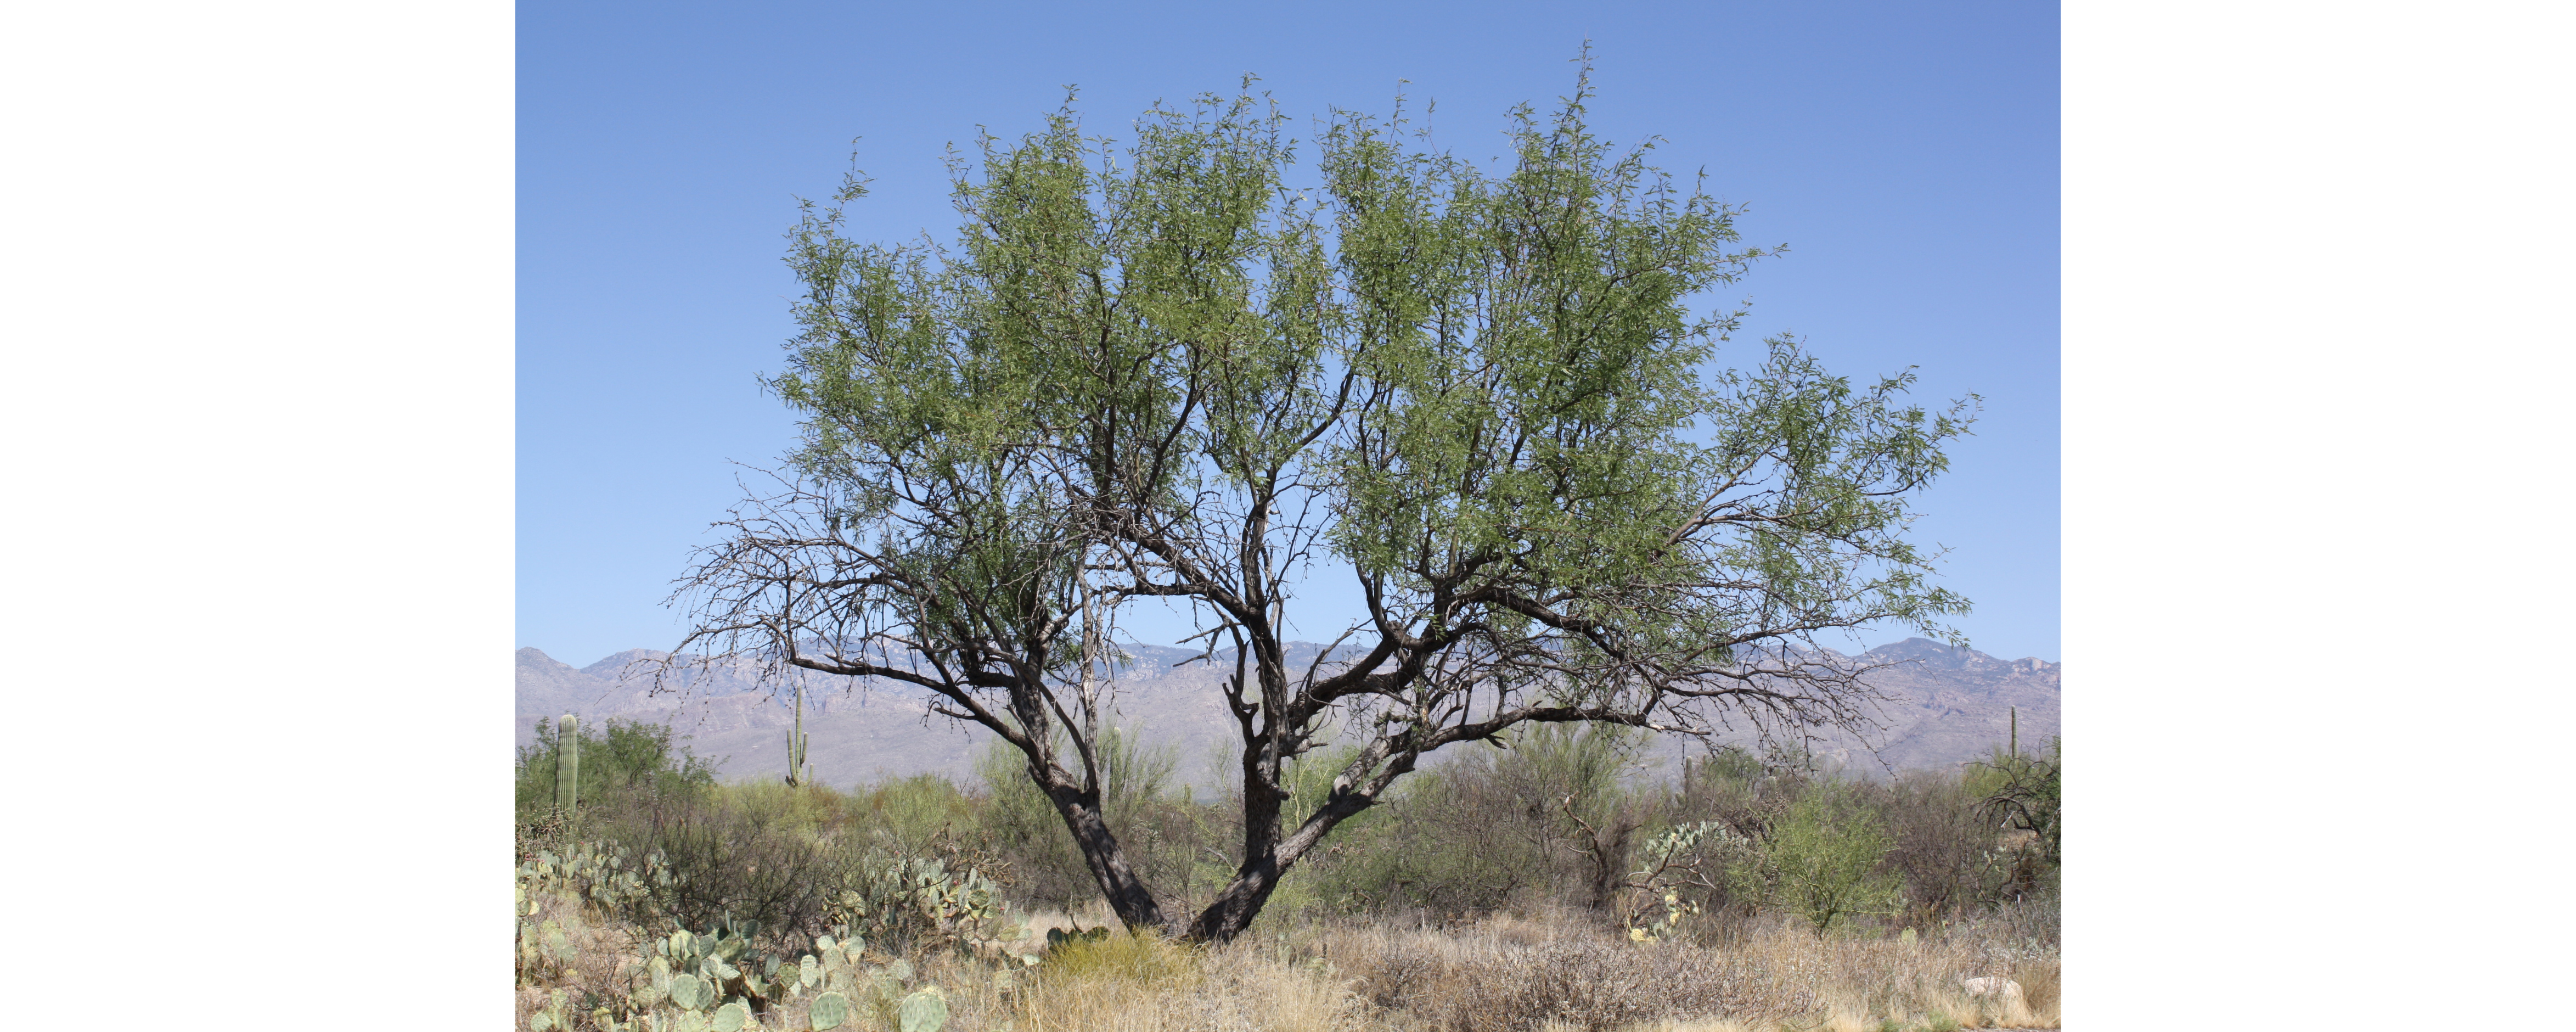 A tree with black bark about 12 feet tall, fanning out with skinny branches and slender leaves.